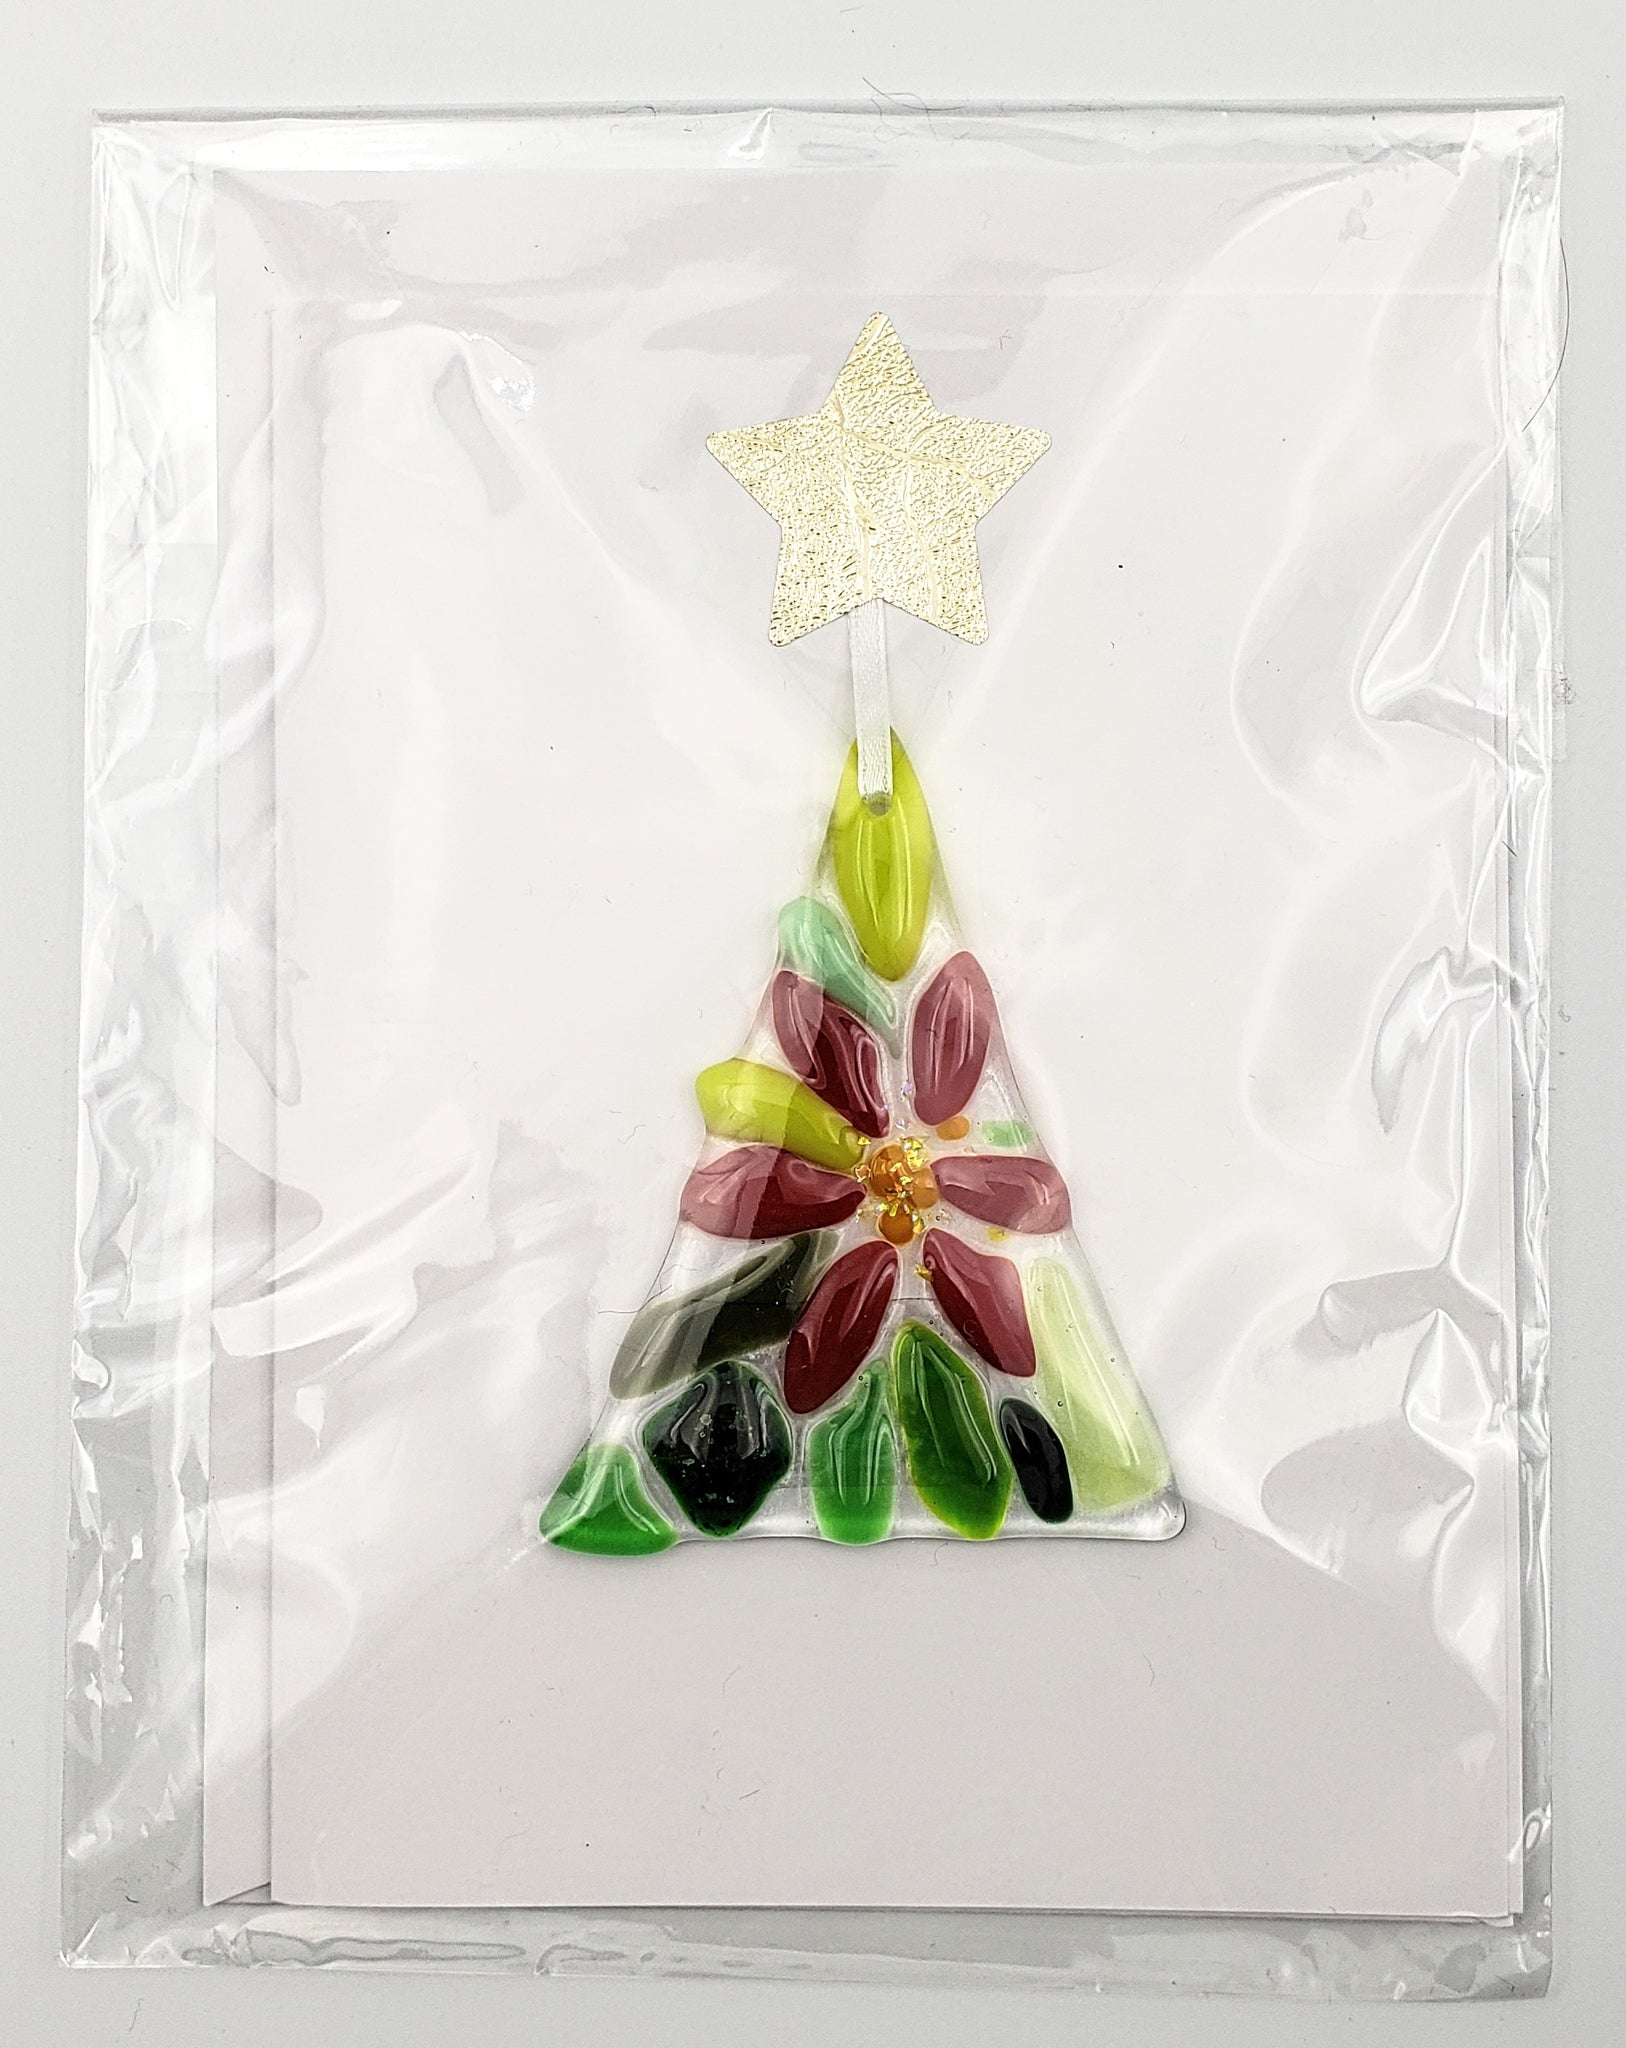 Hanging ornament greeting card #1